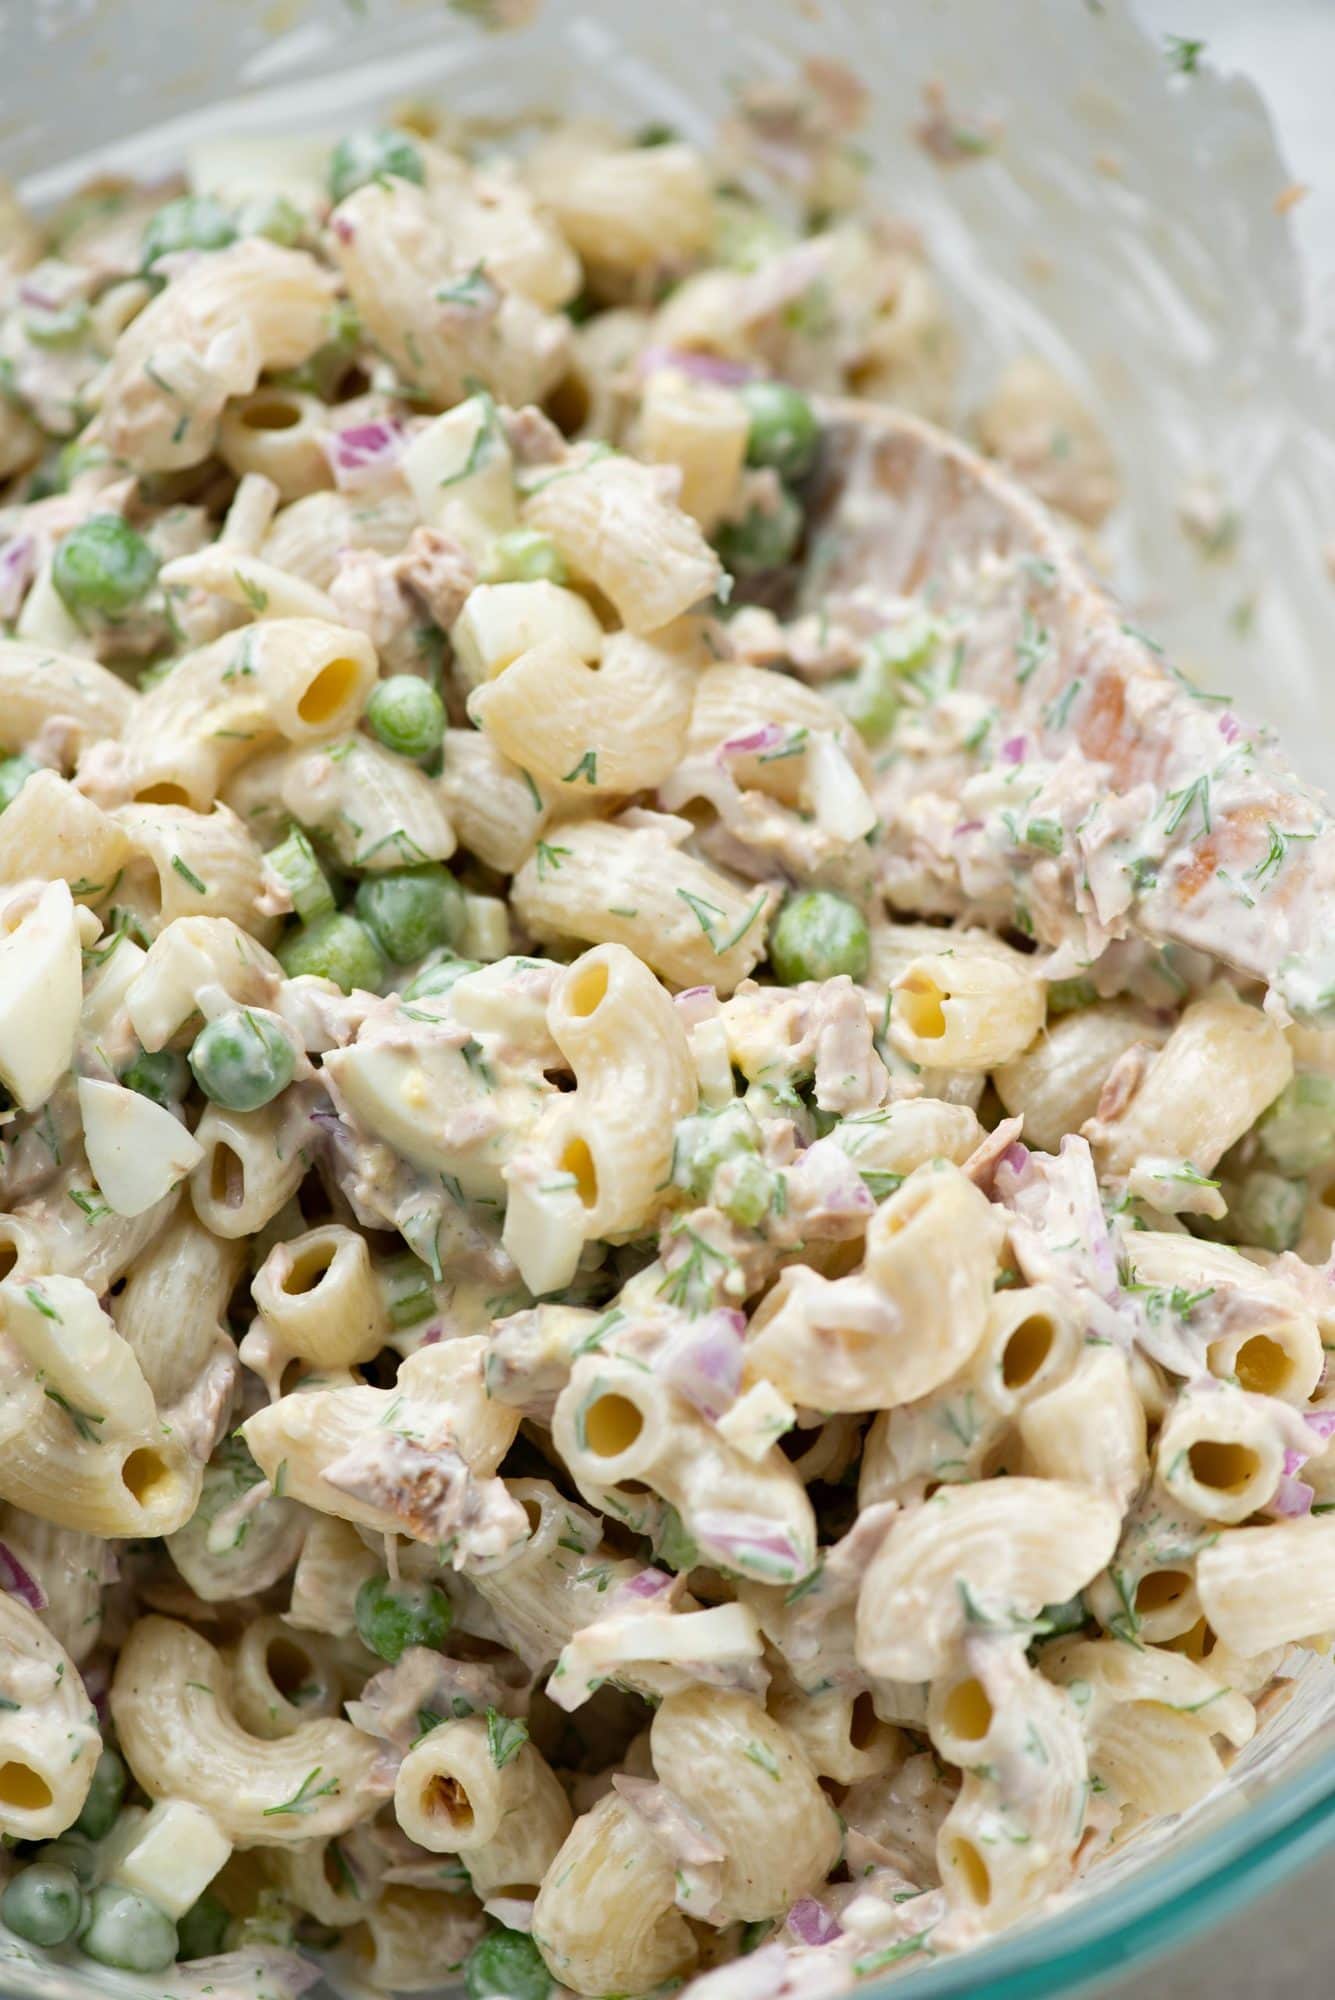 Close up of chunks of tuna, pasta, peas tossed in a creamy mayo-based dressing.